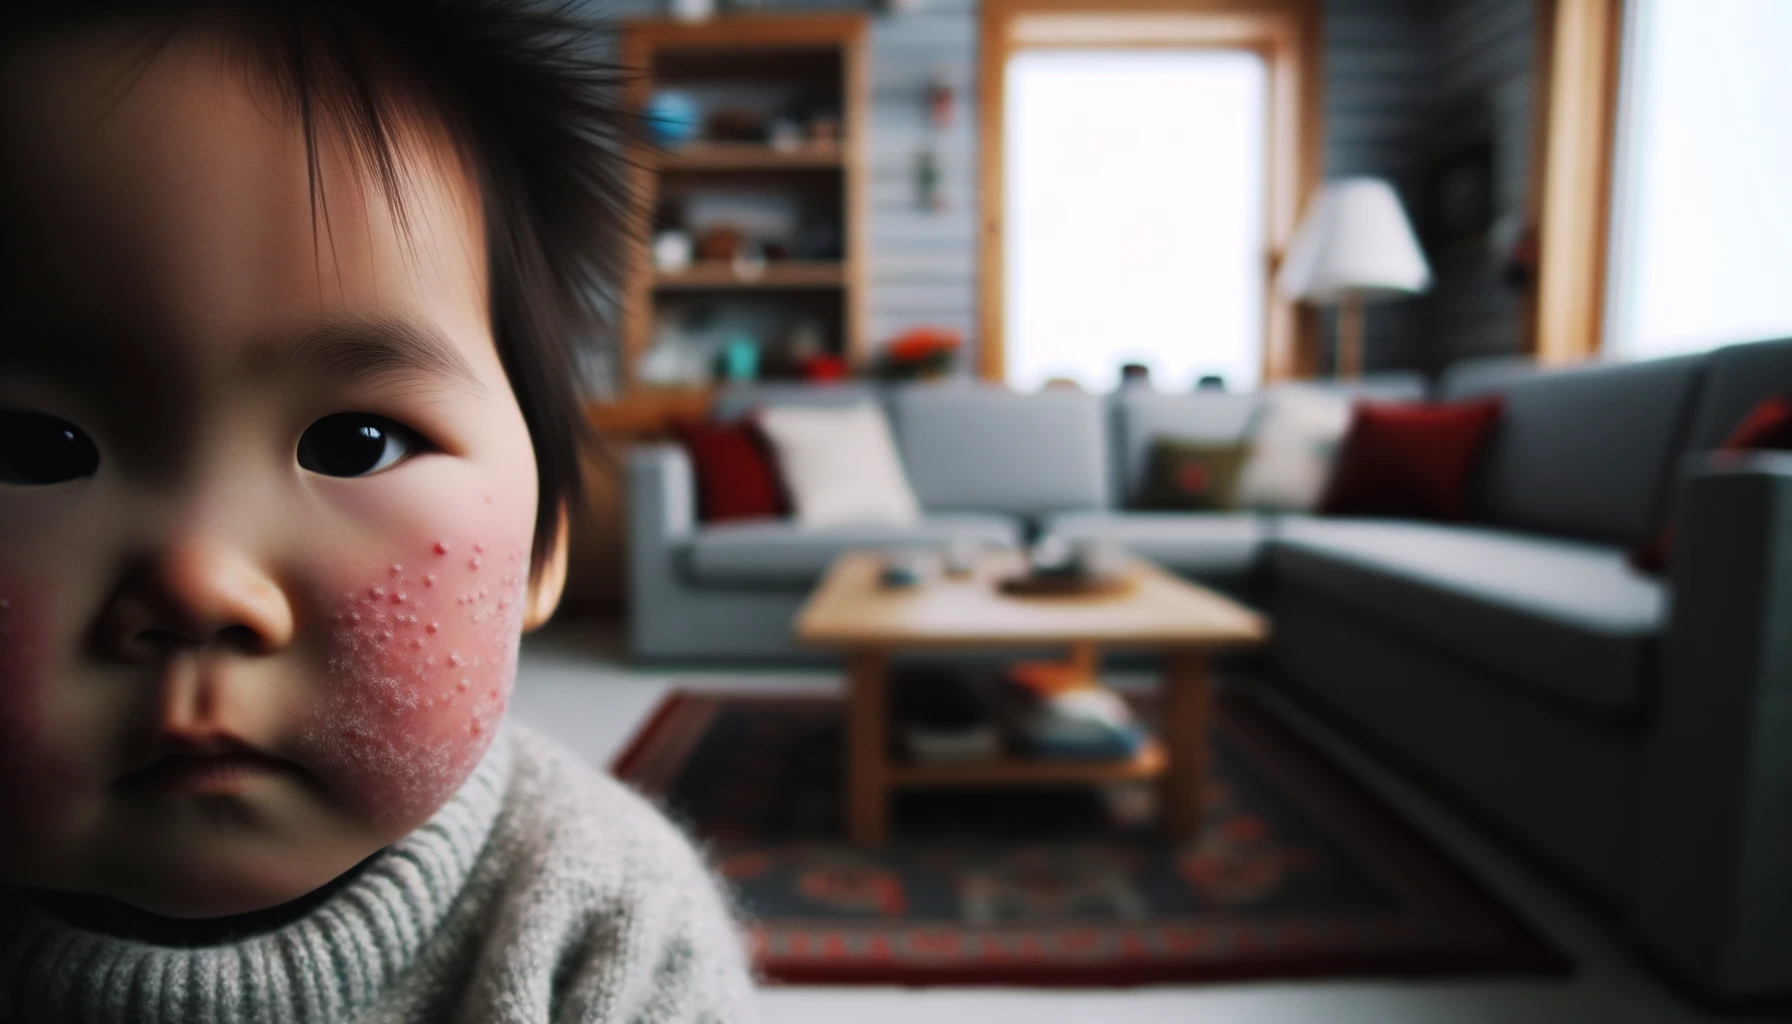 The image depicts a child with a breakout of atopic dermatitis on their cheeks. The image was created using artificial intelligence with DALL-E 3.